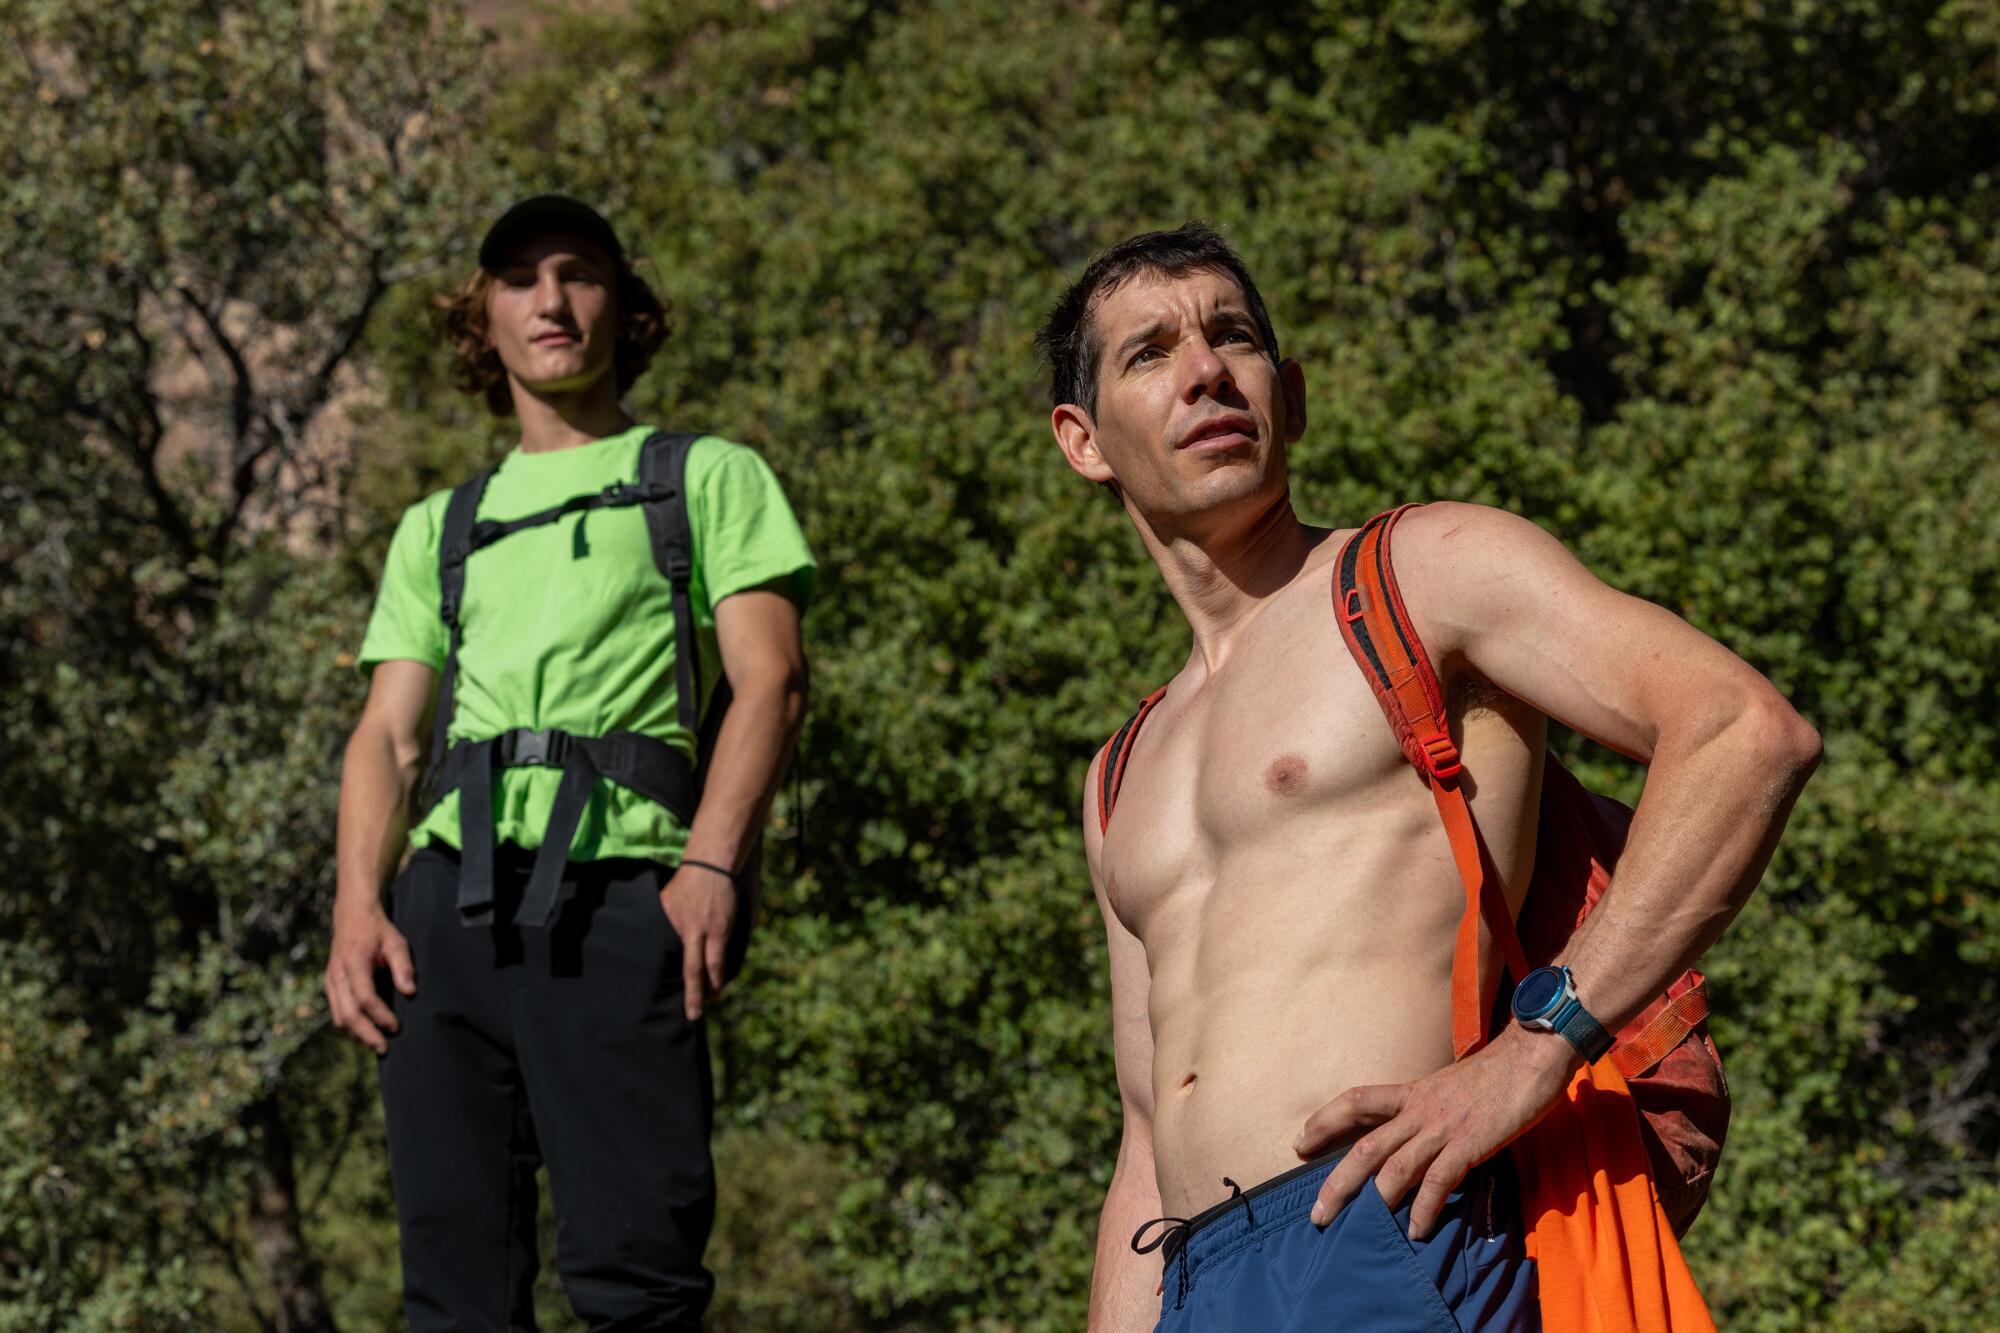 A fit, shirtless man and his hiking partner in a green T-shirt pause on a rugged canyon trail. 